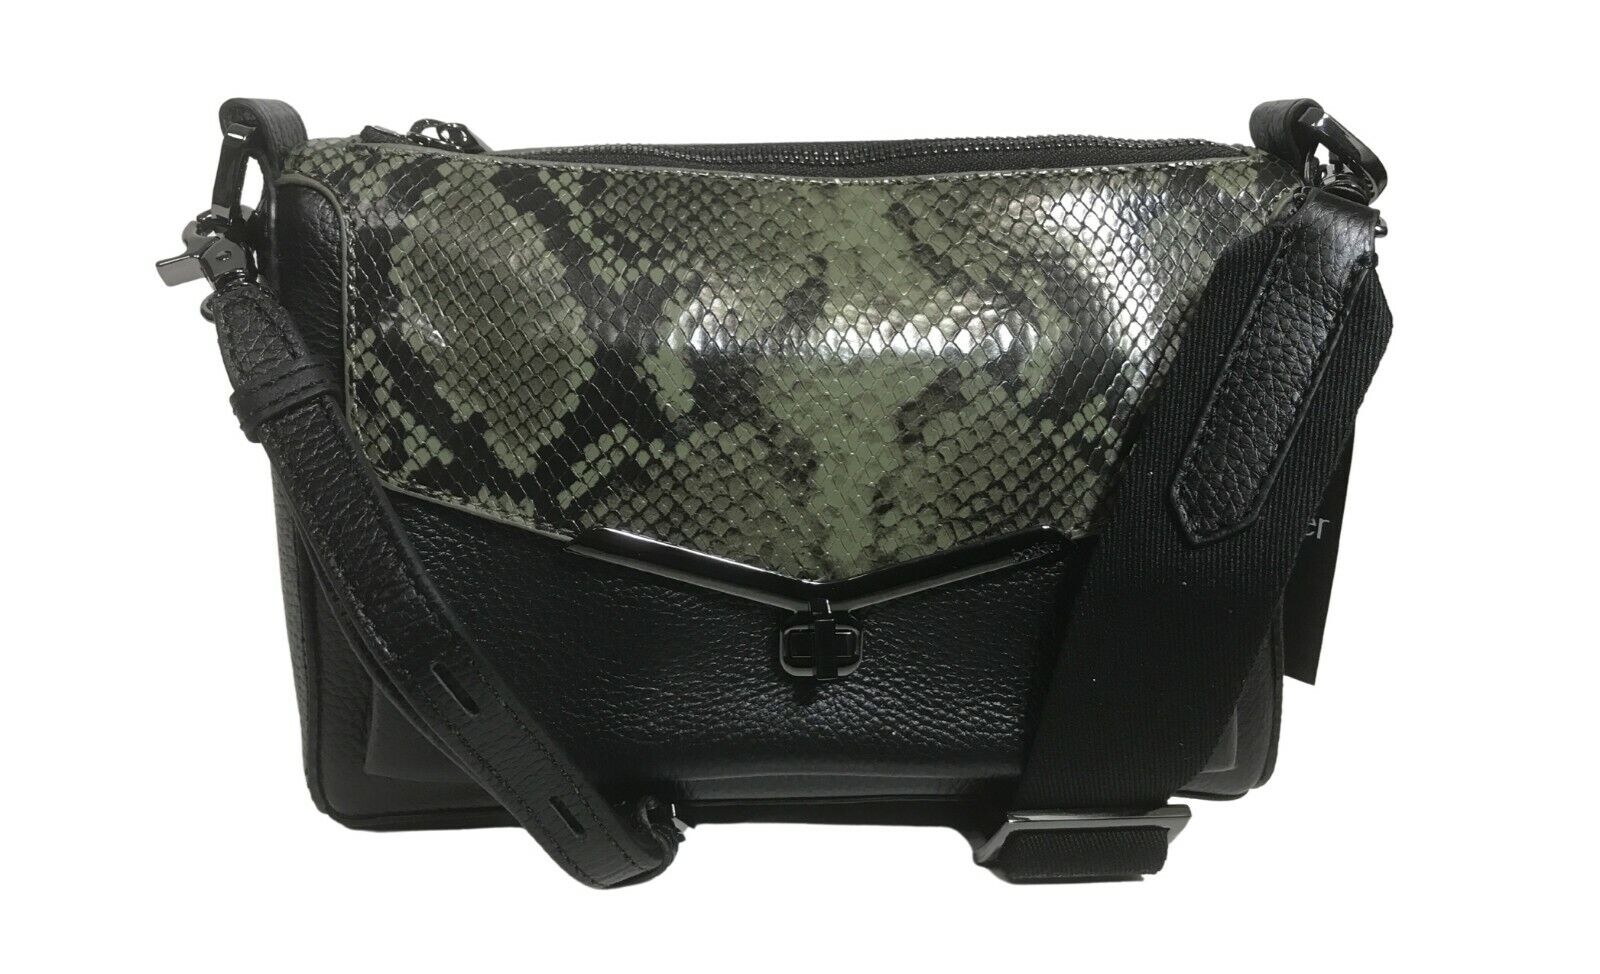 NWT Botkier Valentina Woman\'s Leather Cross Body Military Green Snake MSRP: $248